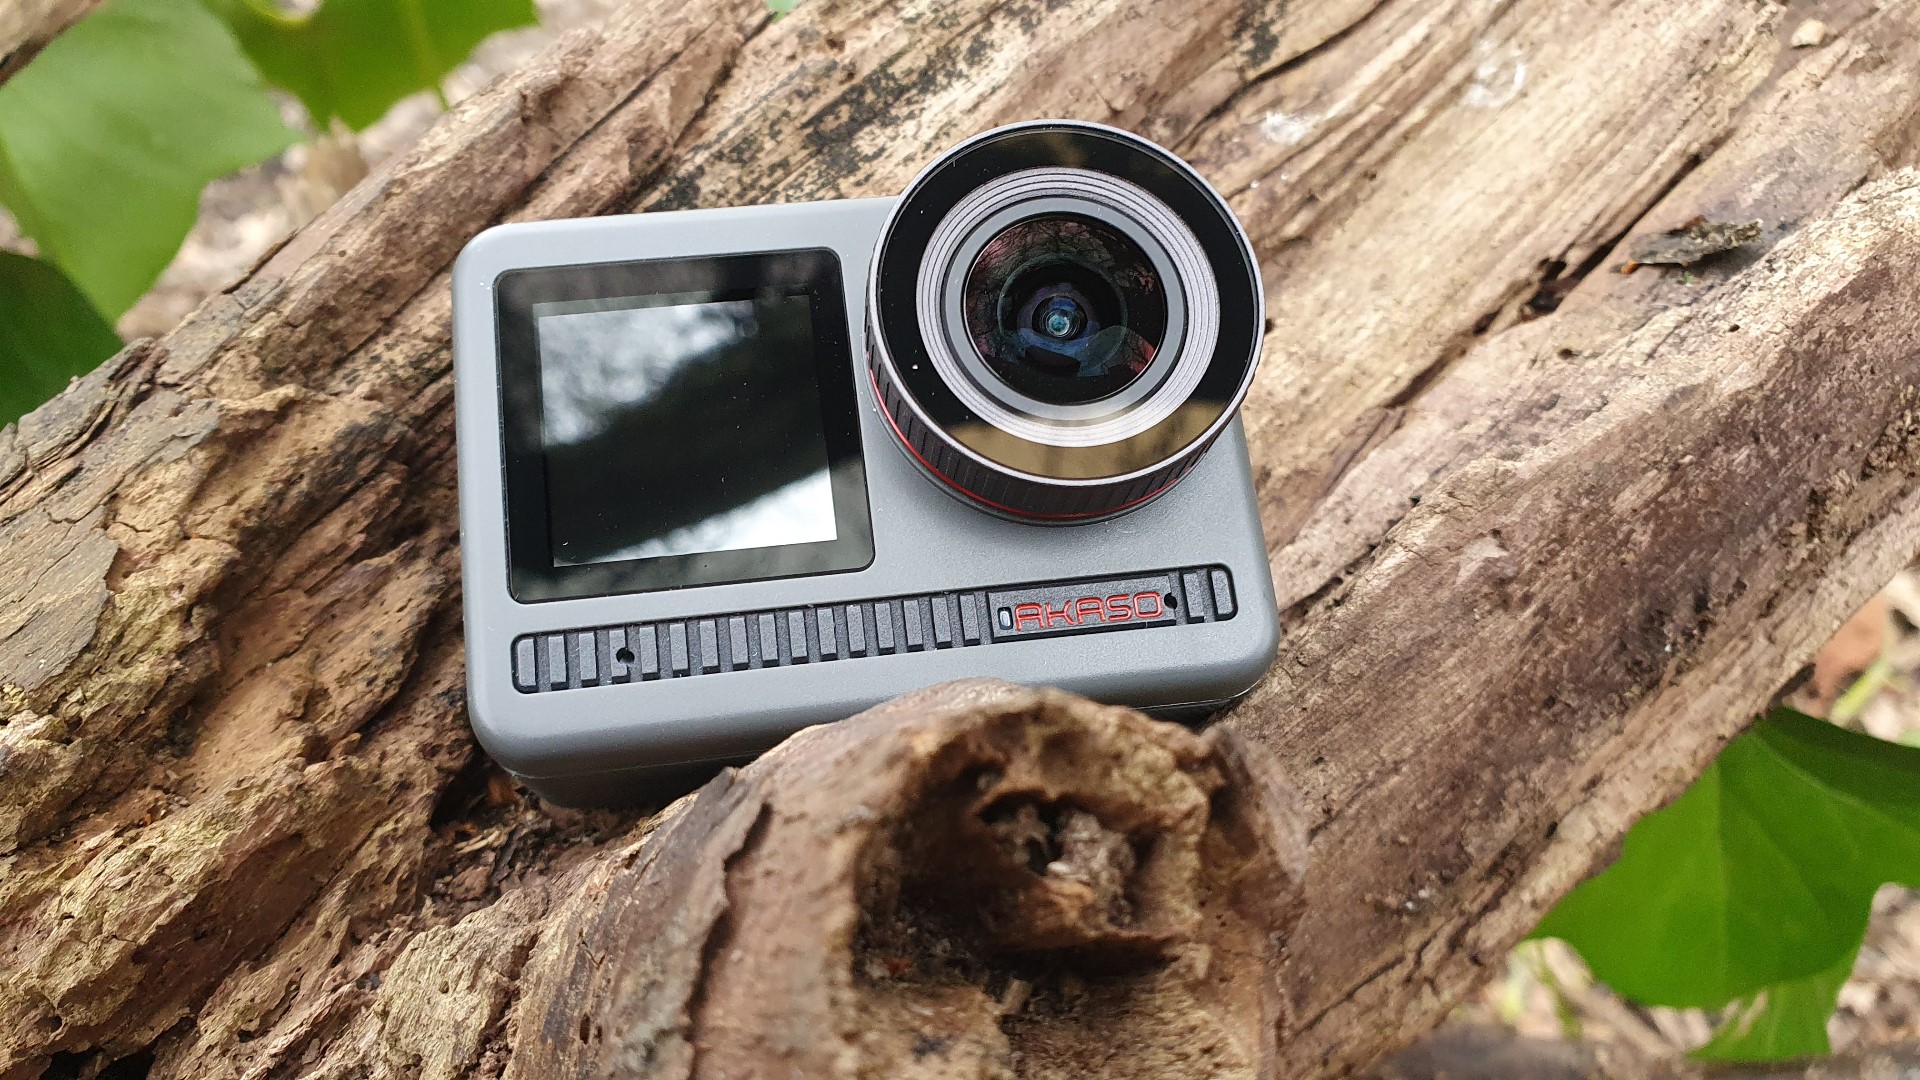 native identification binary Akaso Brave 8 action camera review: not the GoPro rival it hopes to be | T3